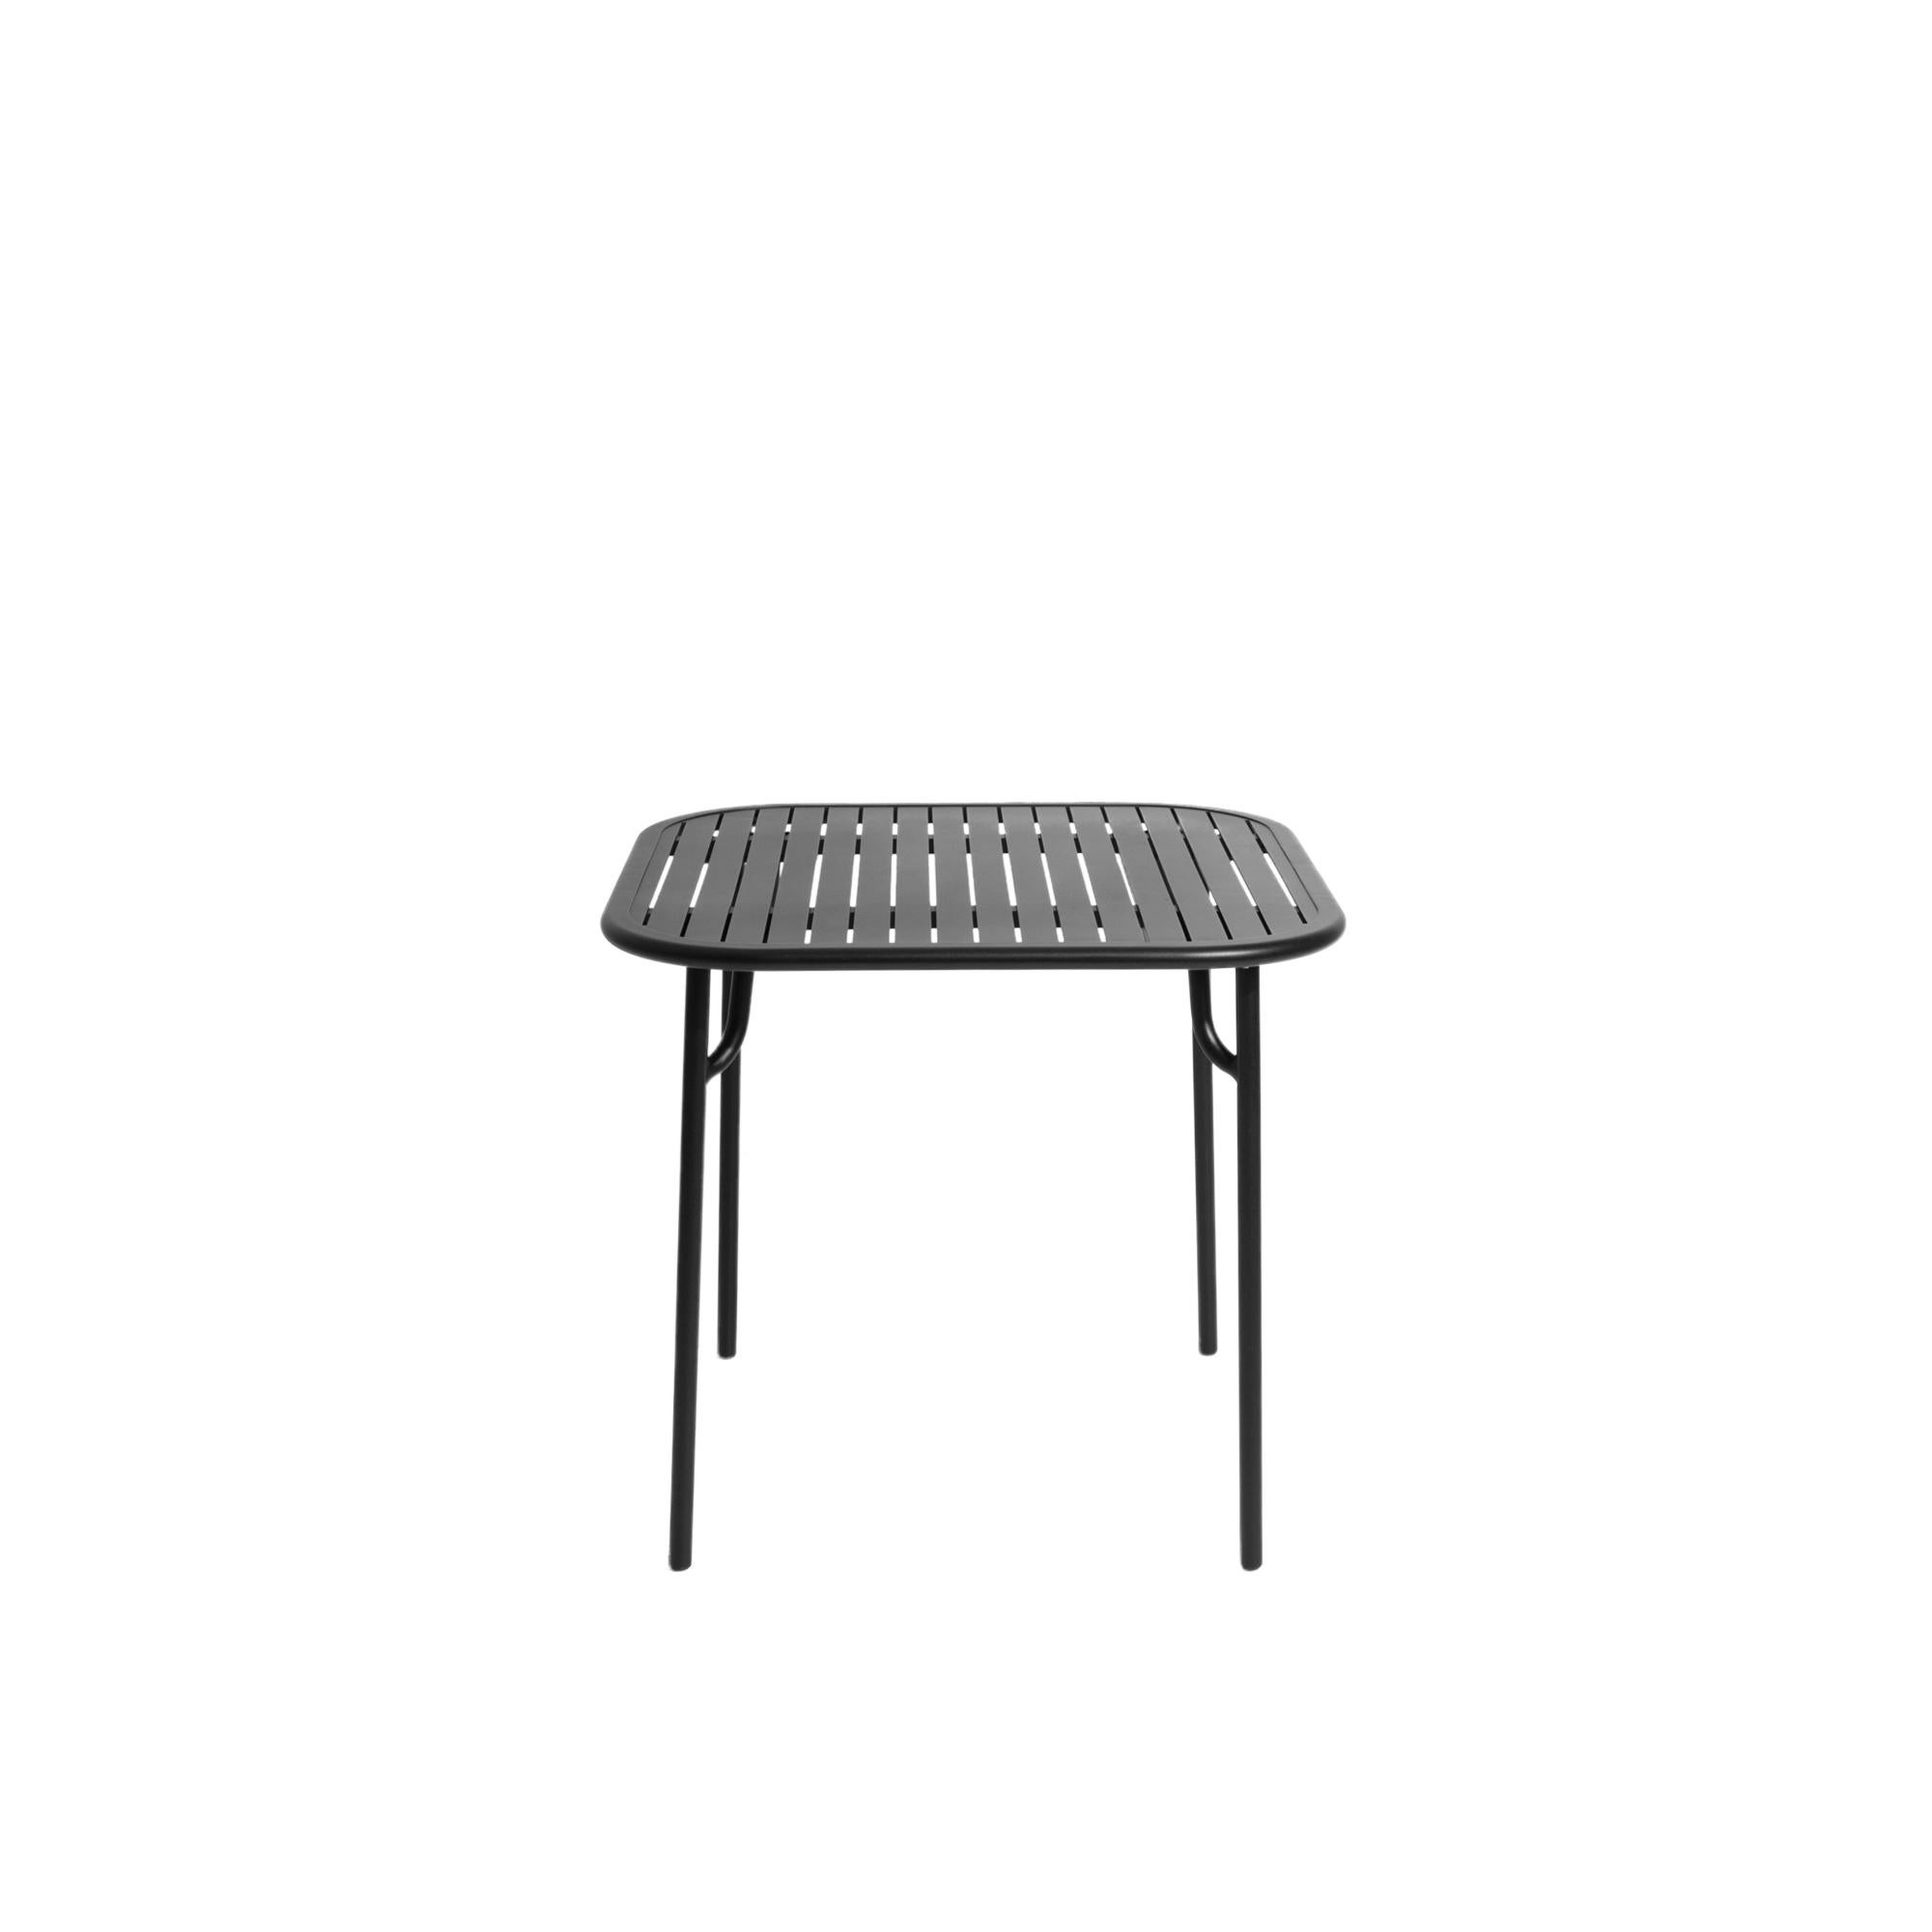 Petite Friture Week-End Square Dining Table in Black Aluminium with Slats by Studio BrichetZiegler, 2017

The week-end collection is a full range of outdoor furniture, in aluminium grained epoxy paint, matt finish, that includes 18 functions and 8